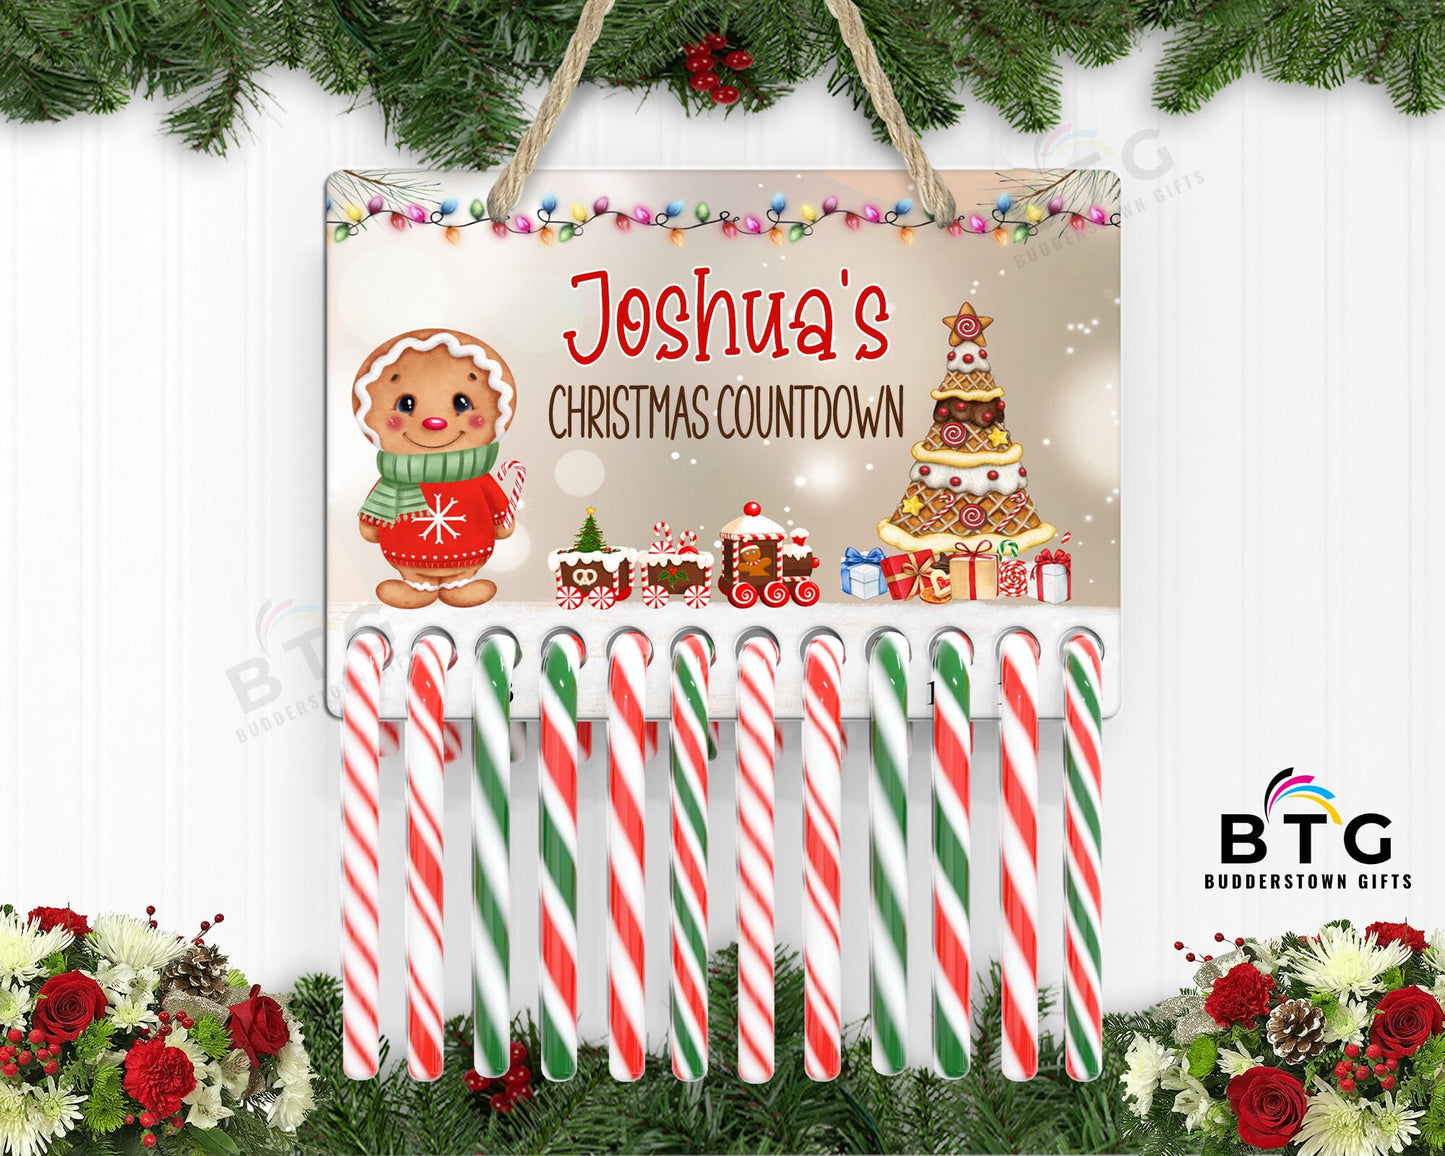 Candy Cane Christmas Countdown - 12 Days to Christmas - Gingerbread Boy - Kids Interactive